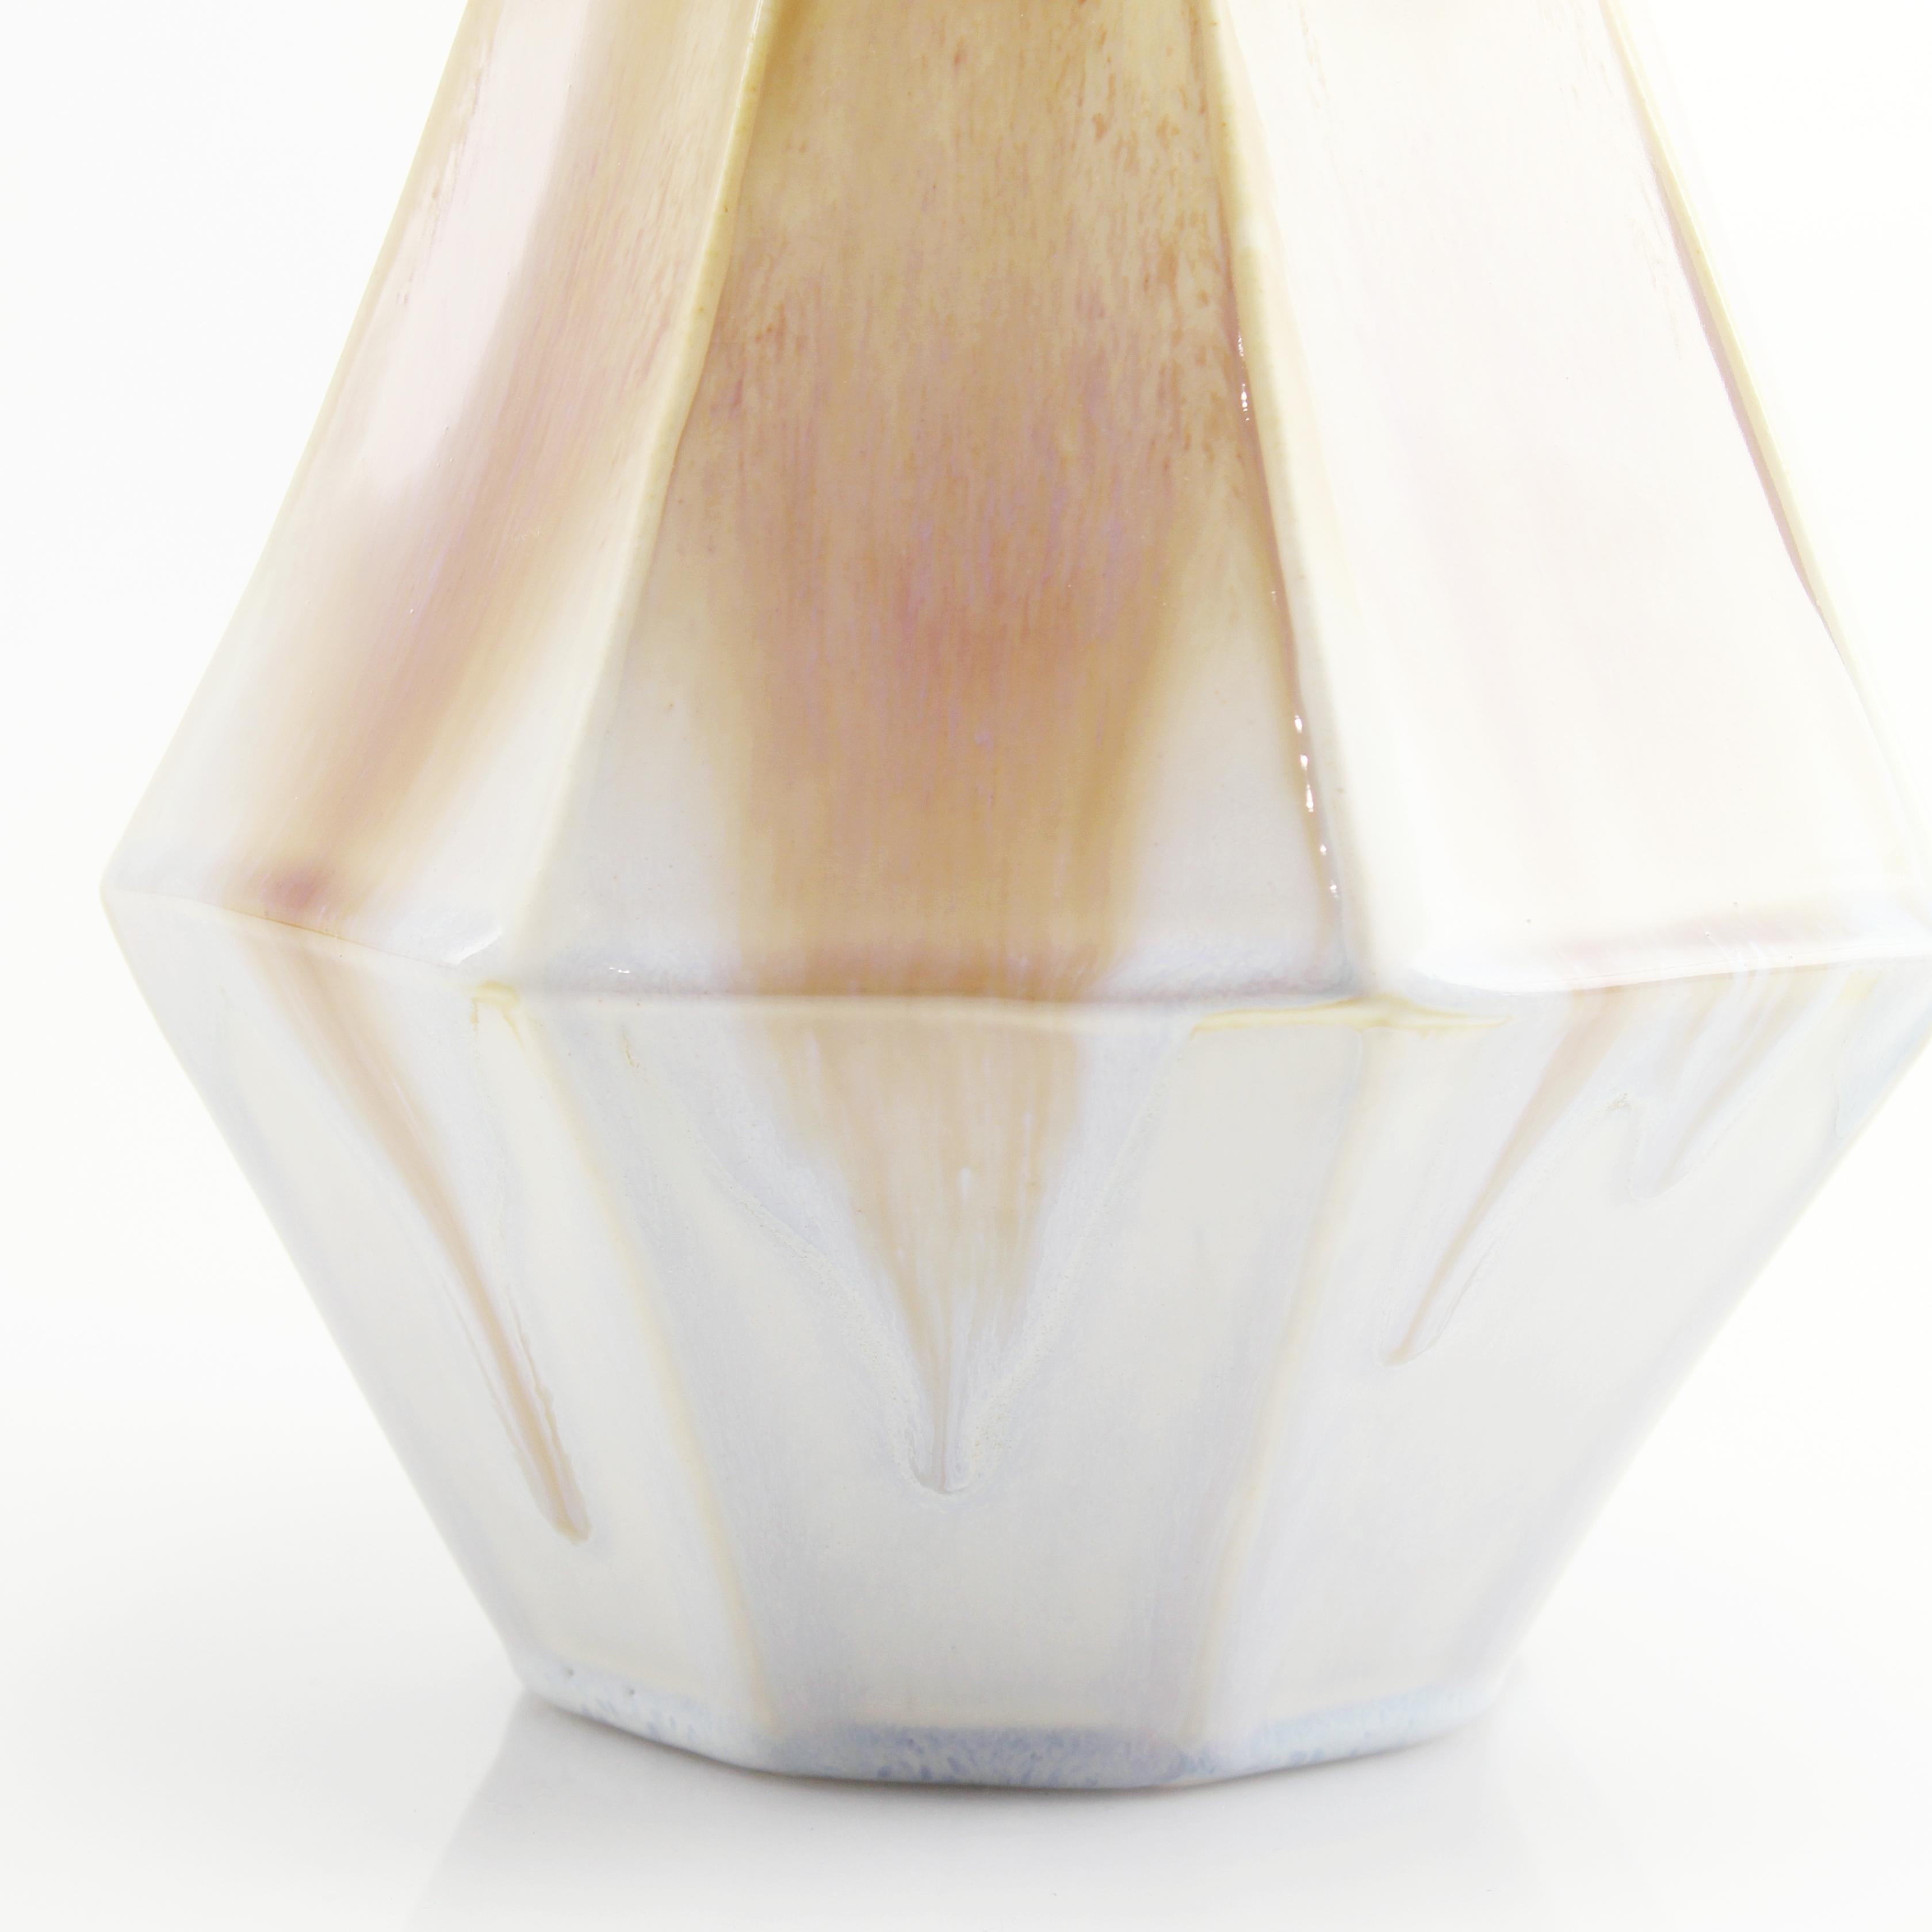 The clean, modern design of the geometric statement vase offers an updated, elegant look to your room with a Mid-Century Modern feel. This one of a kind piece features a crystalline sandstone glaze with a blush ombre effect. Add a large arrangement